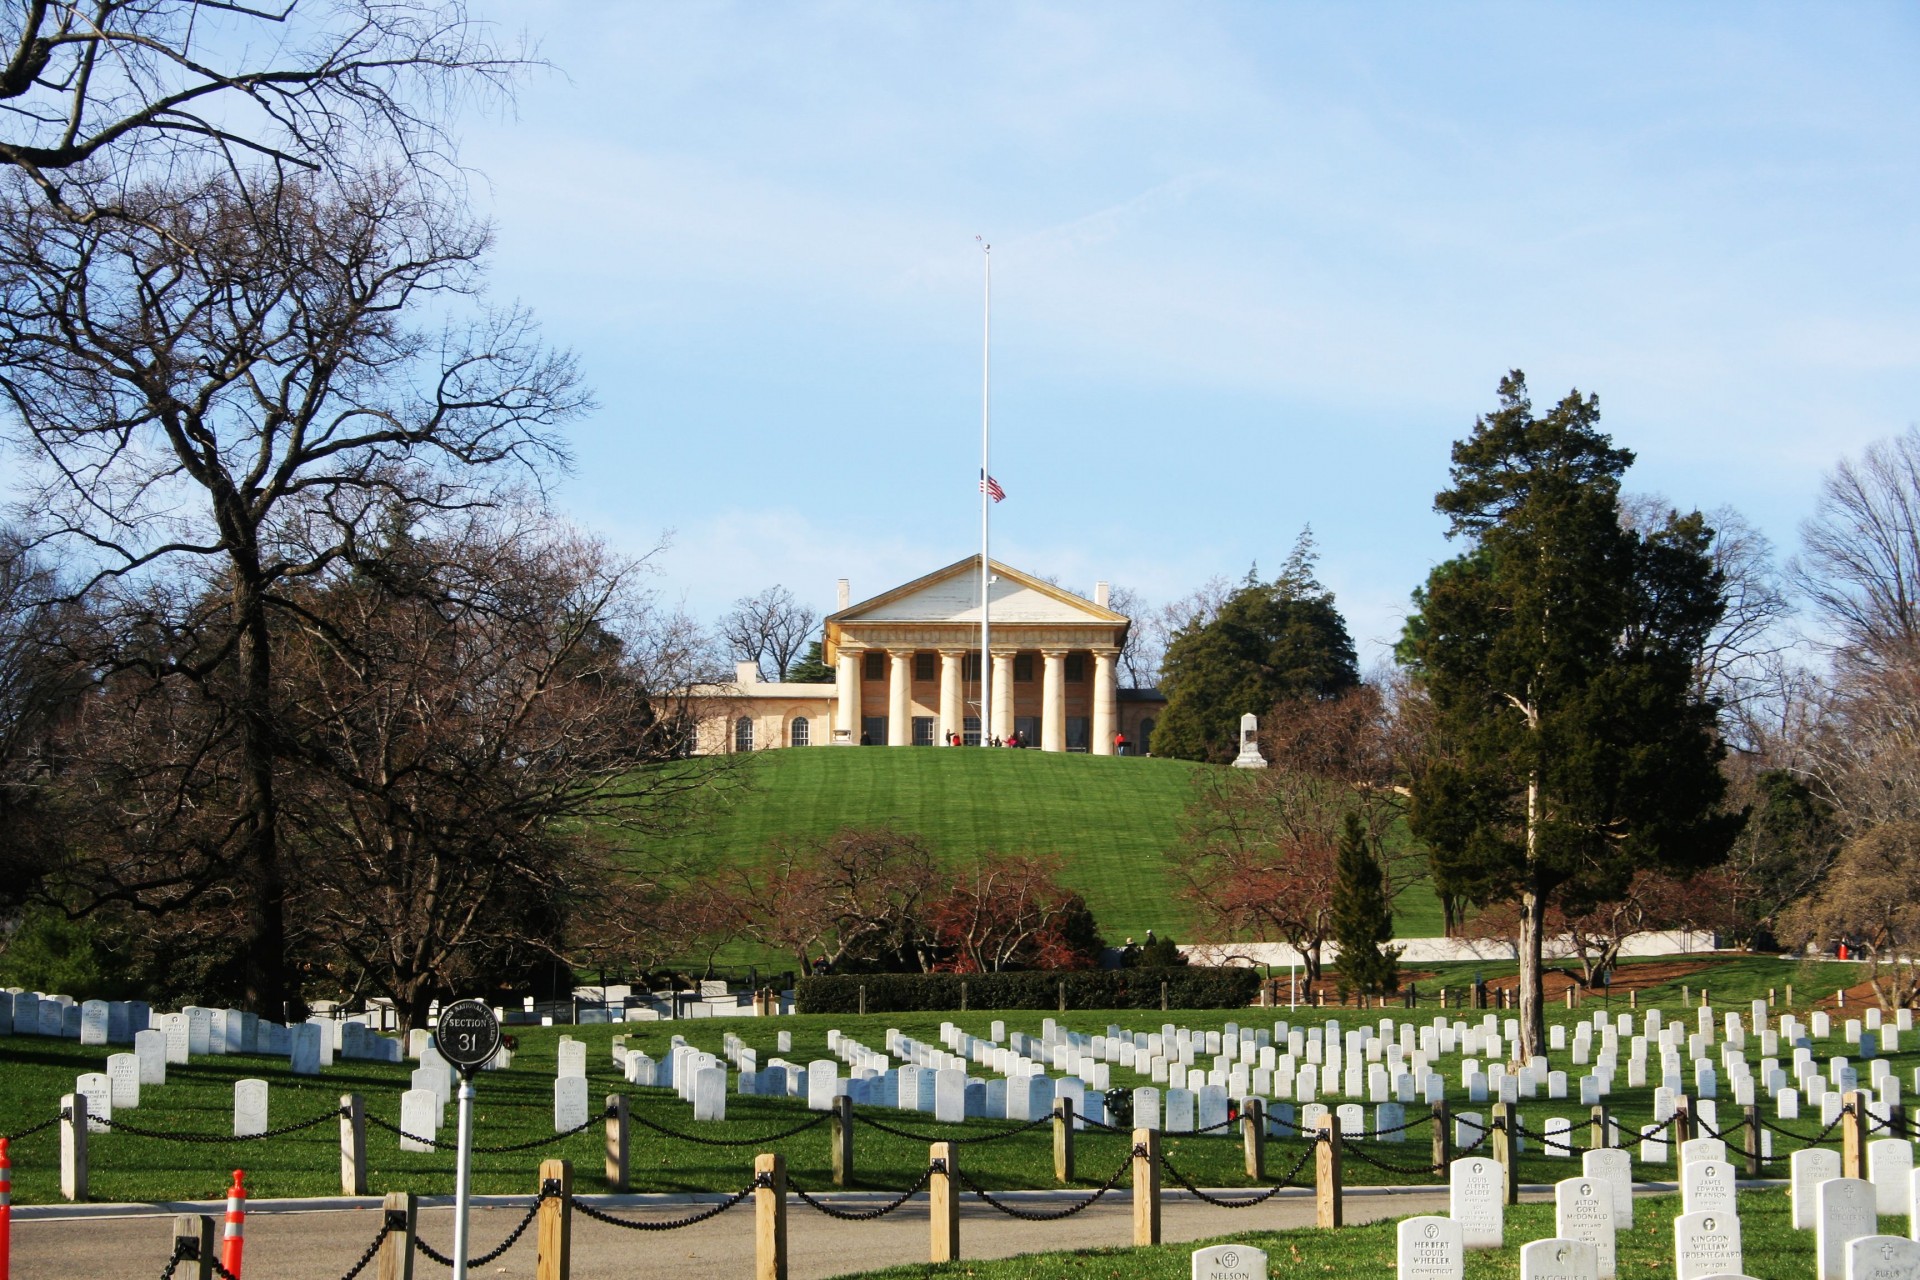 Arlington National Cemetery graves, and headstone. Marking the hallowed grounds of our brave soldiers who gave all.